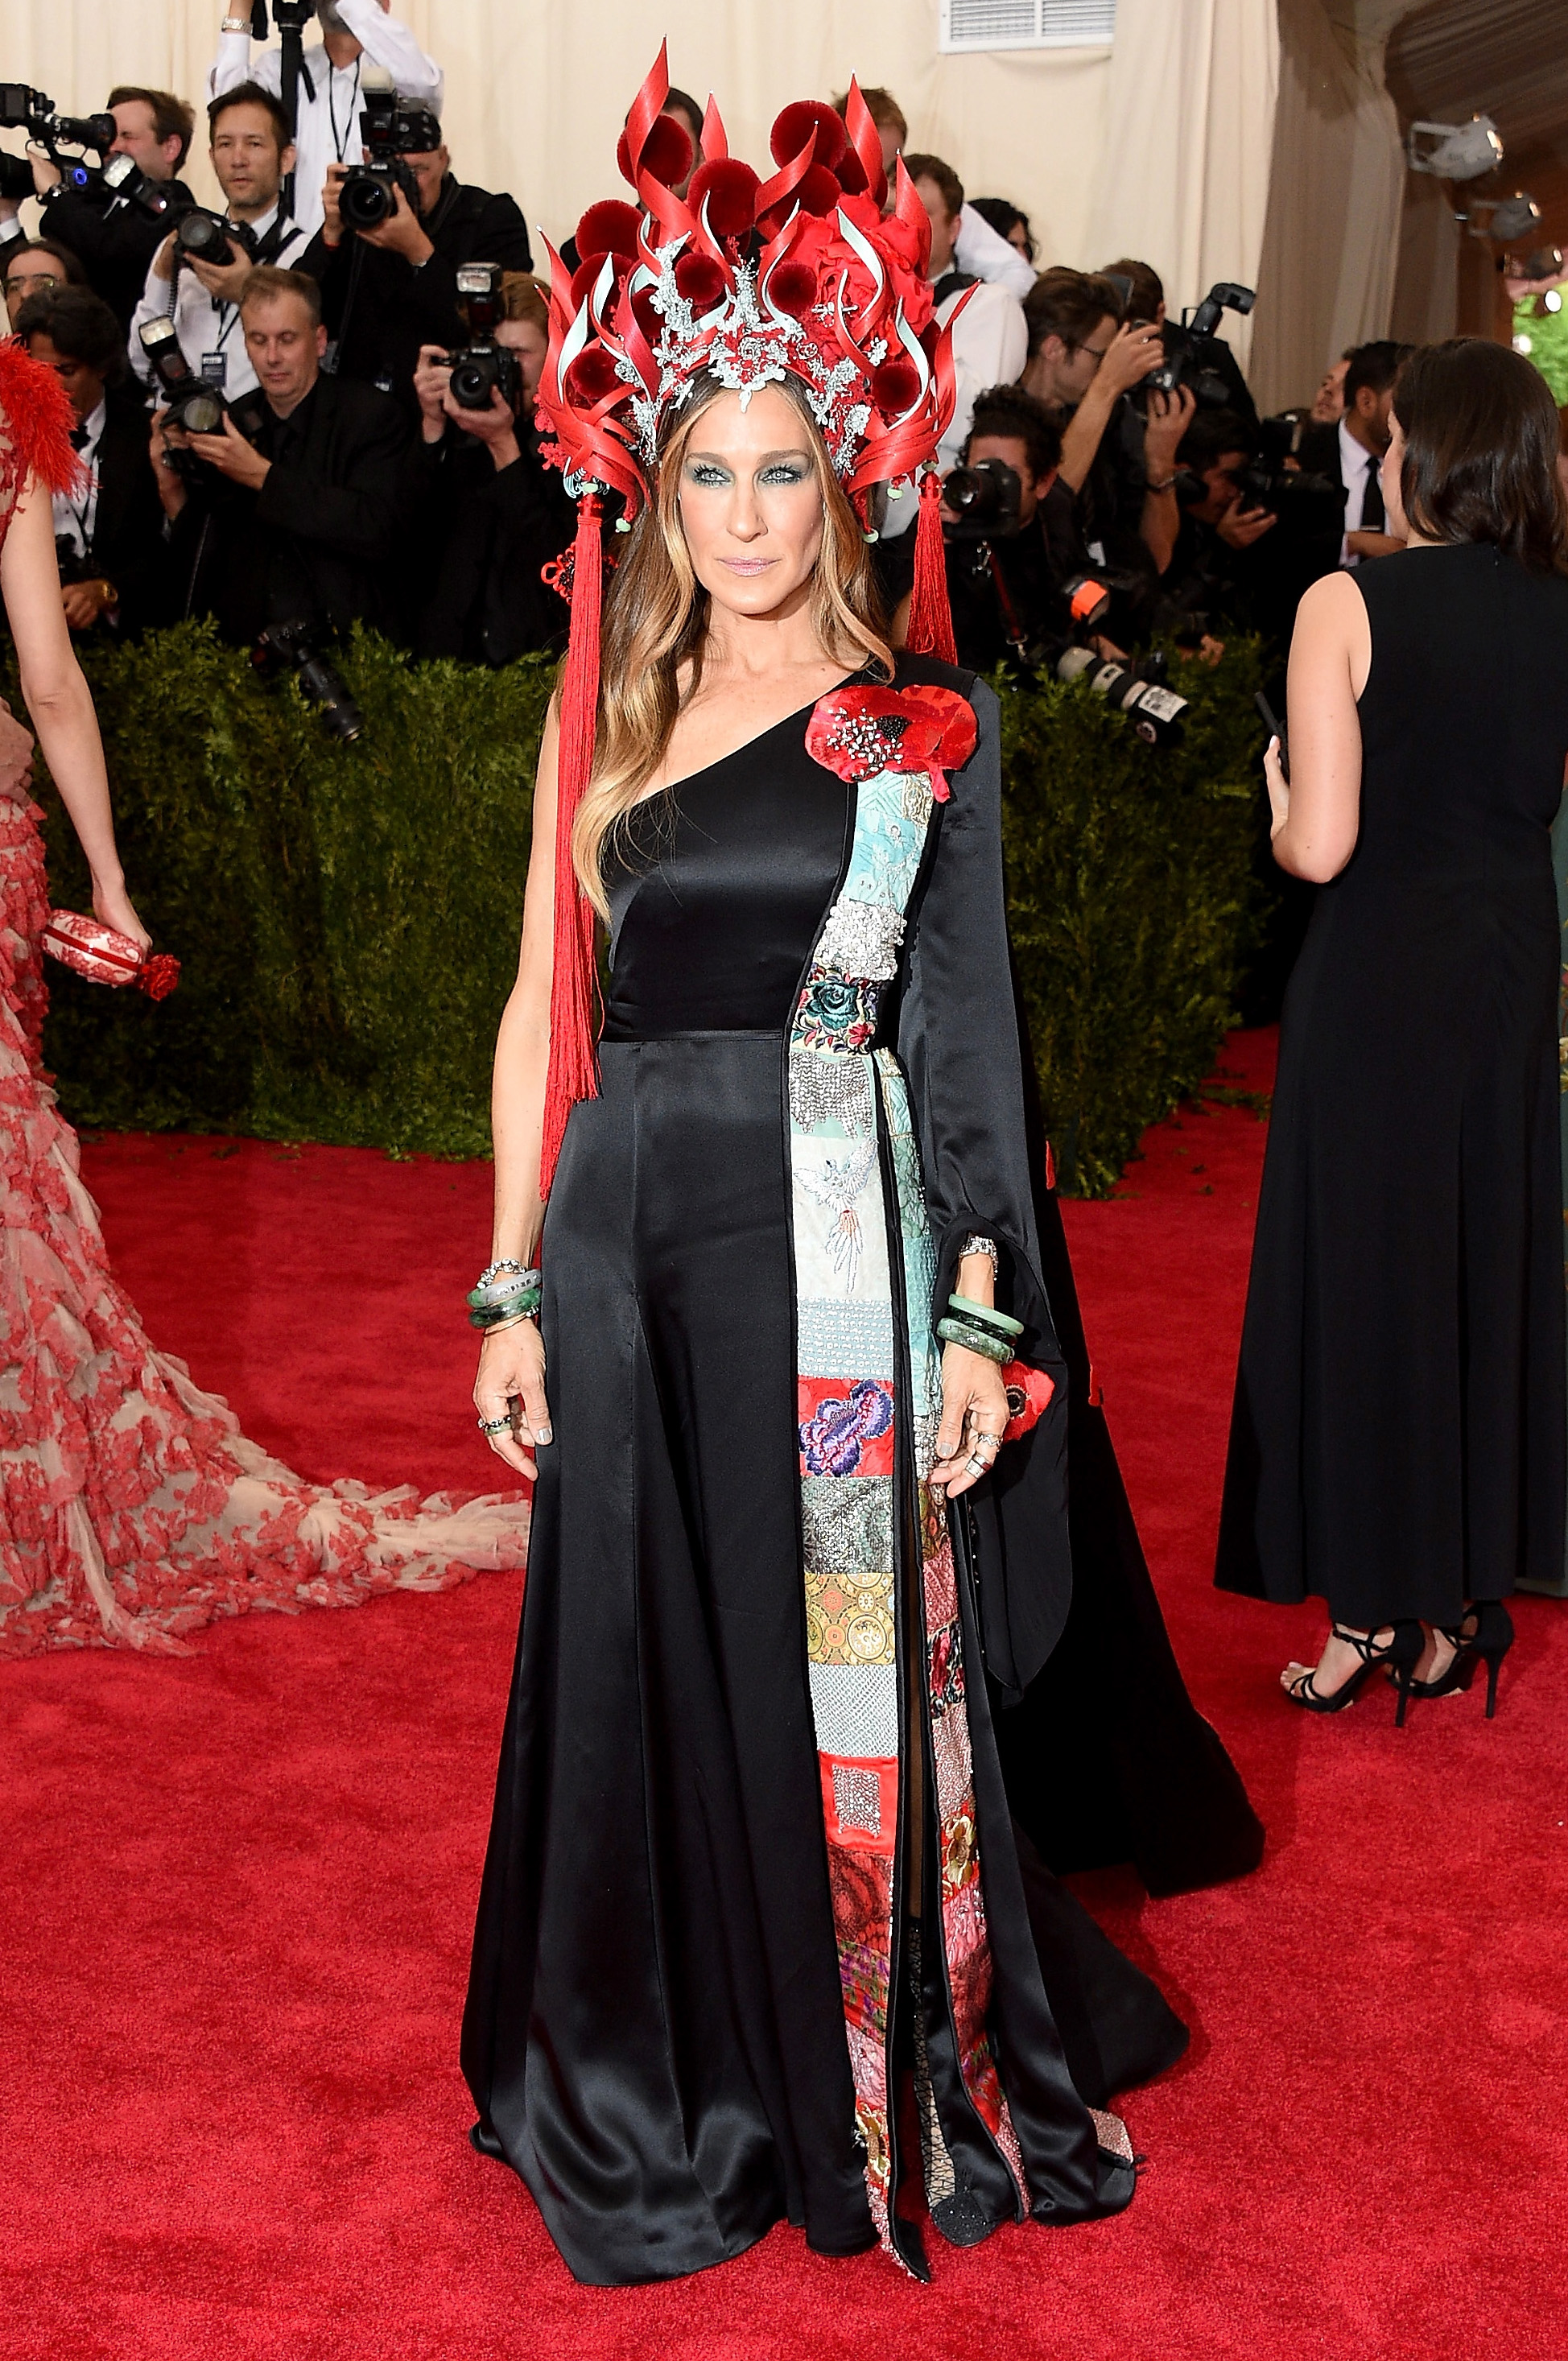 The Best Met Gala Looks from the Past 5 Years